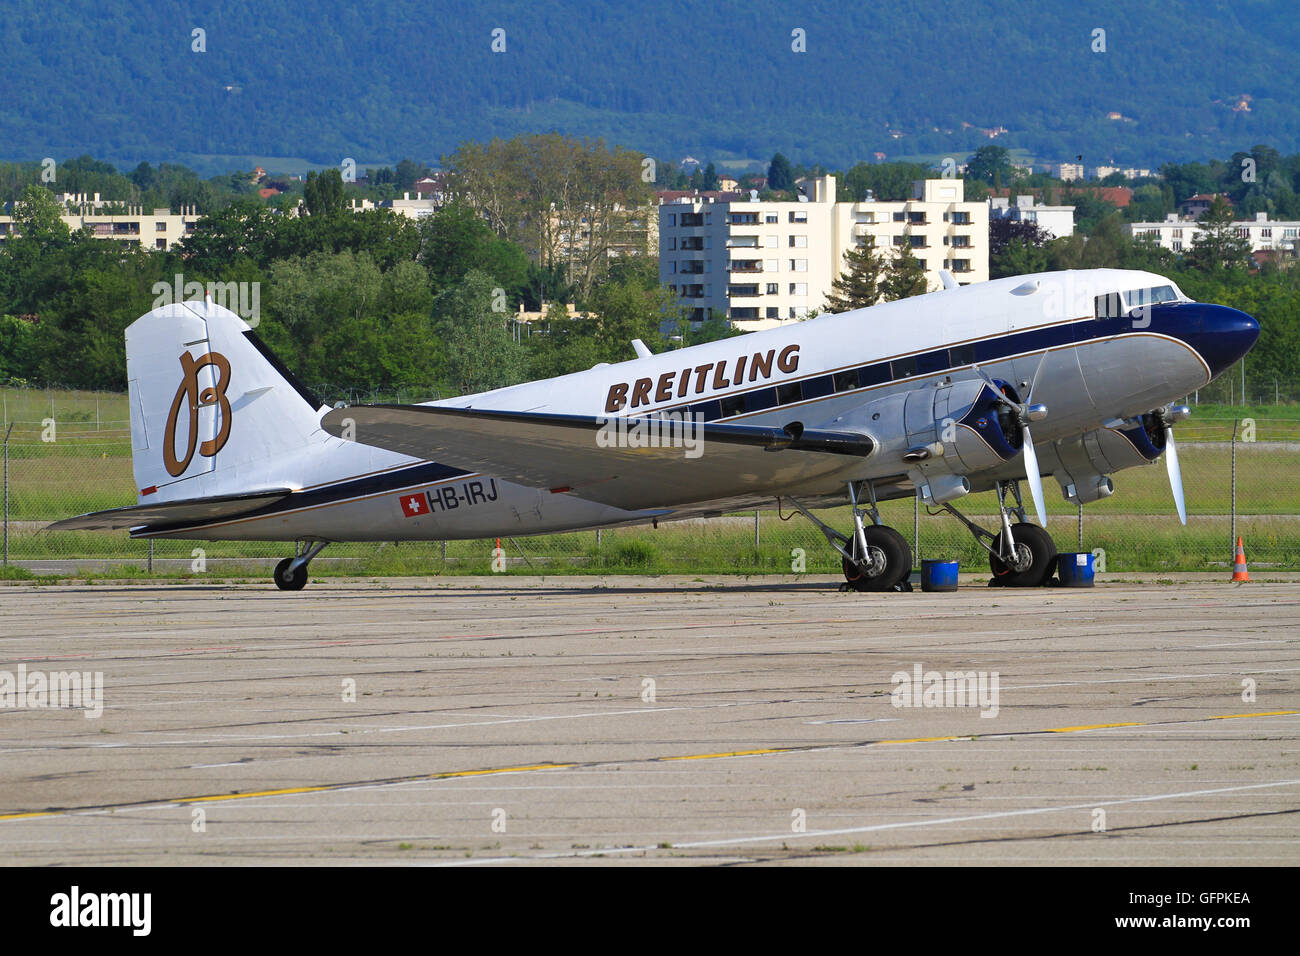 Genf/Switzerland August 5, 2015: One of the oldest planes Douglas DC-3 Dakota from Breitling taxing to take off at Genf Airpo Stock Photo